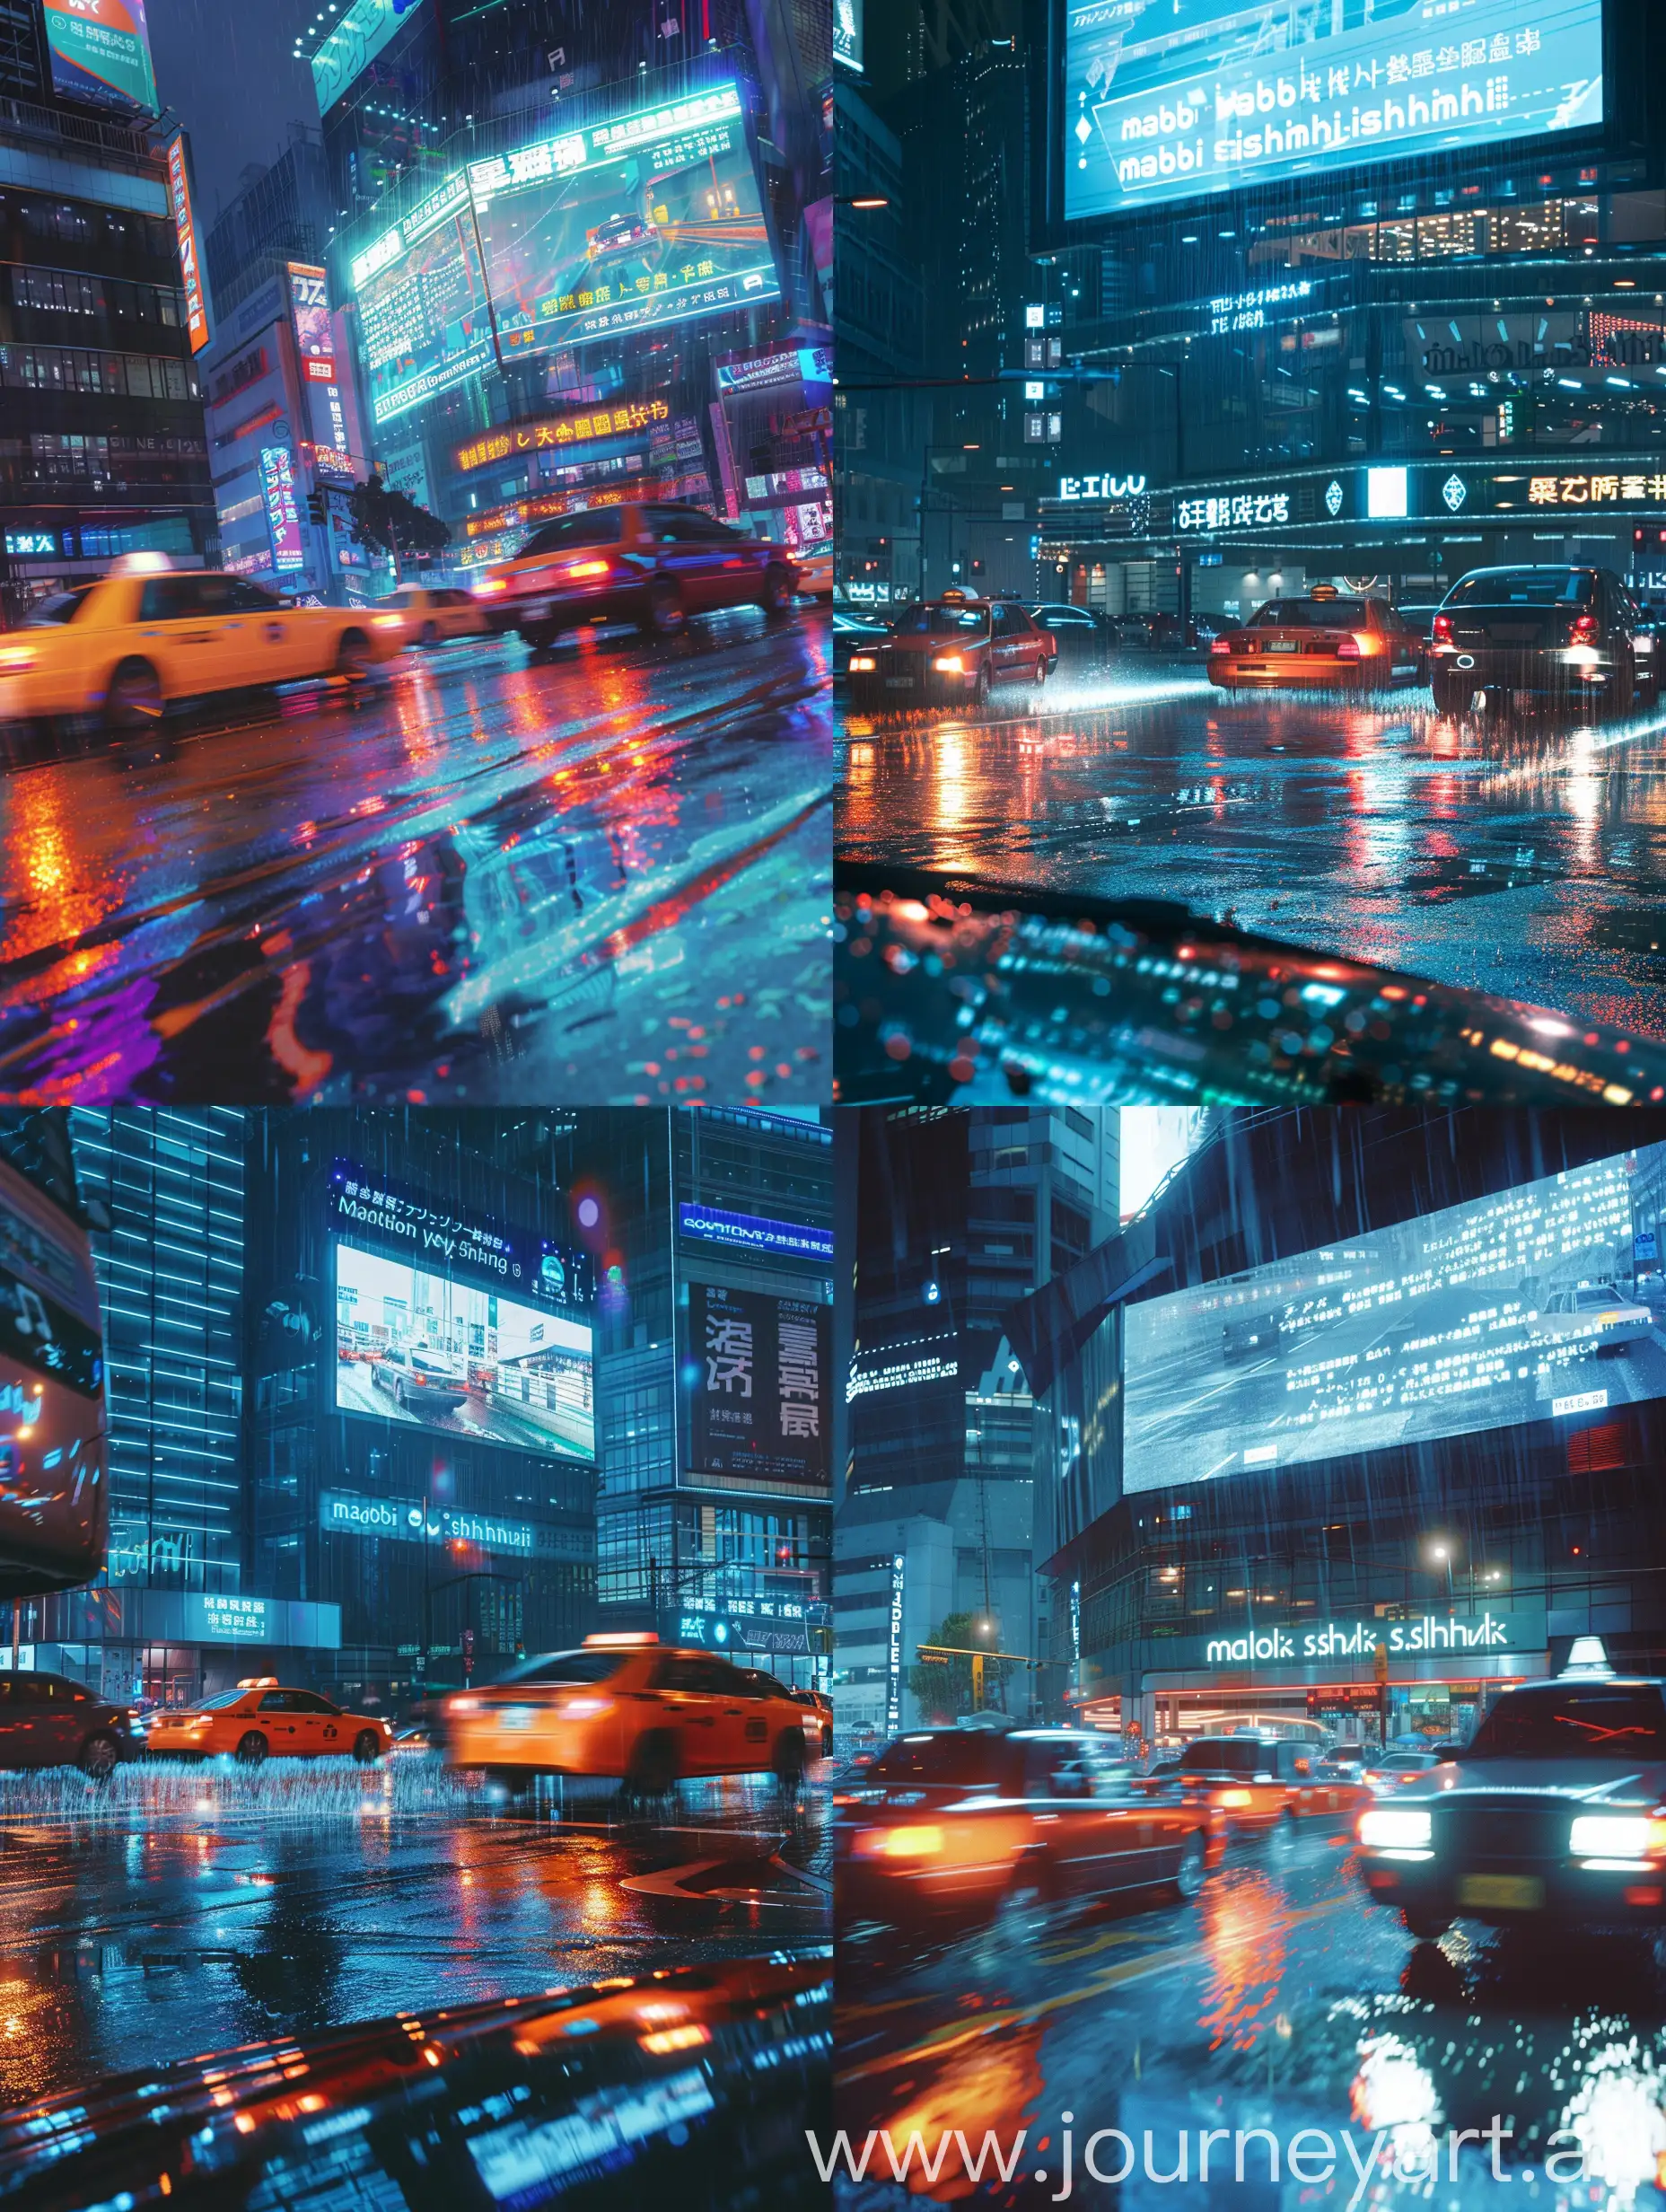 A busy street in the rain, cars passing by, buildings in the background, dark and rainy, neon lights reflecting off the wet street, a building in the background with a large screen displaying some words,rain,wet road,night time, building lights, dream like glow,high quality,anime style,art of makoto shinkai,